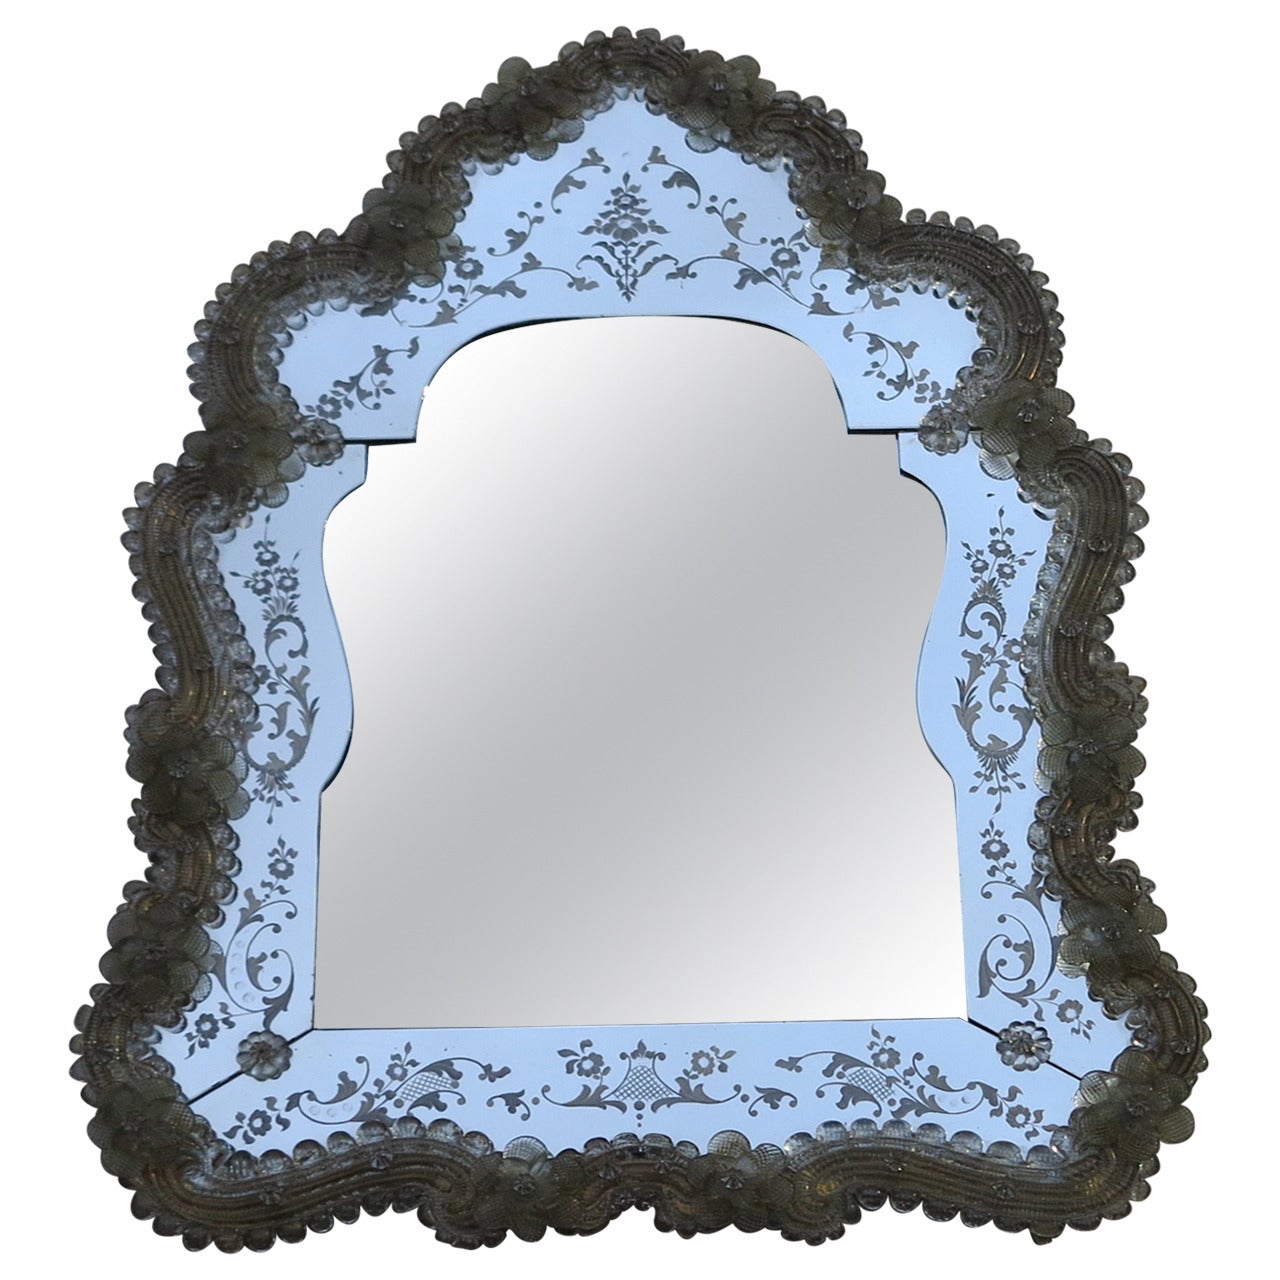 Veronese Crest Mirror with a Beveled Mirror in the Center